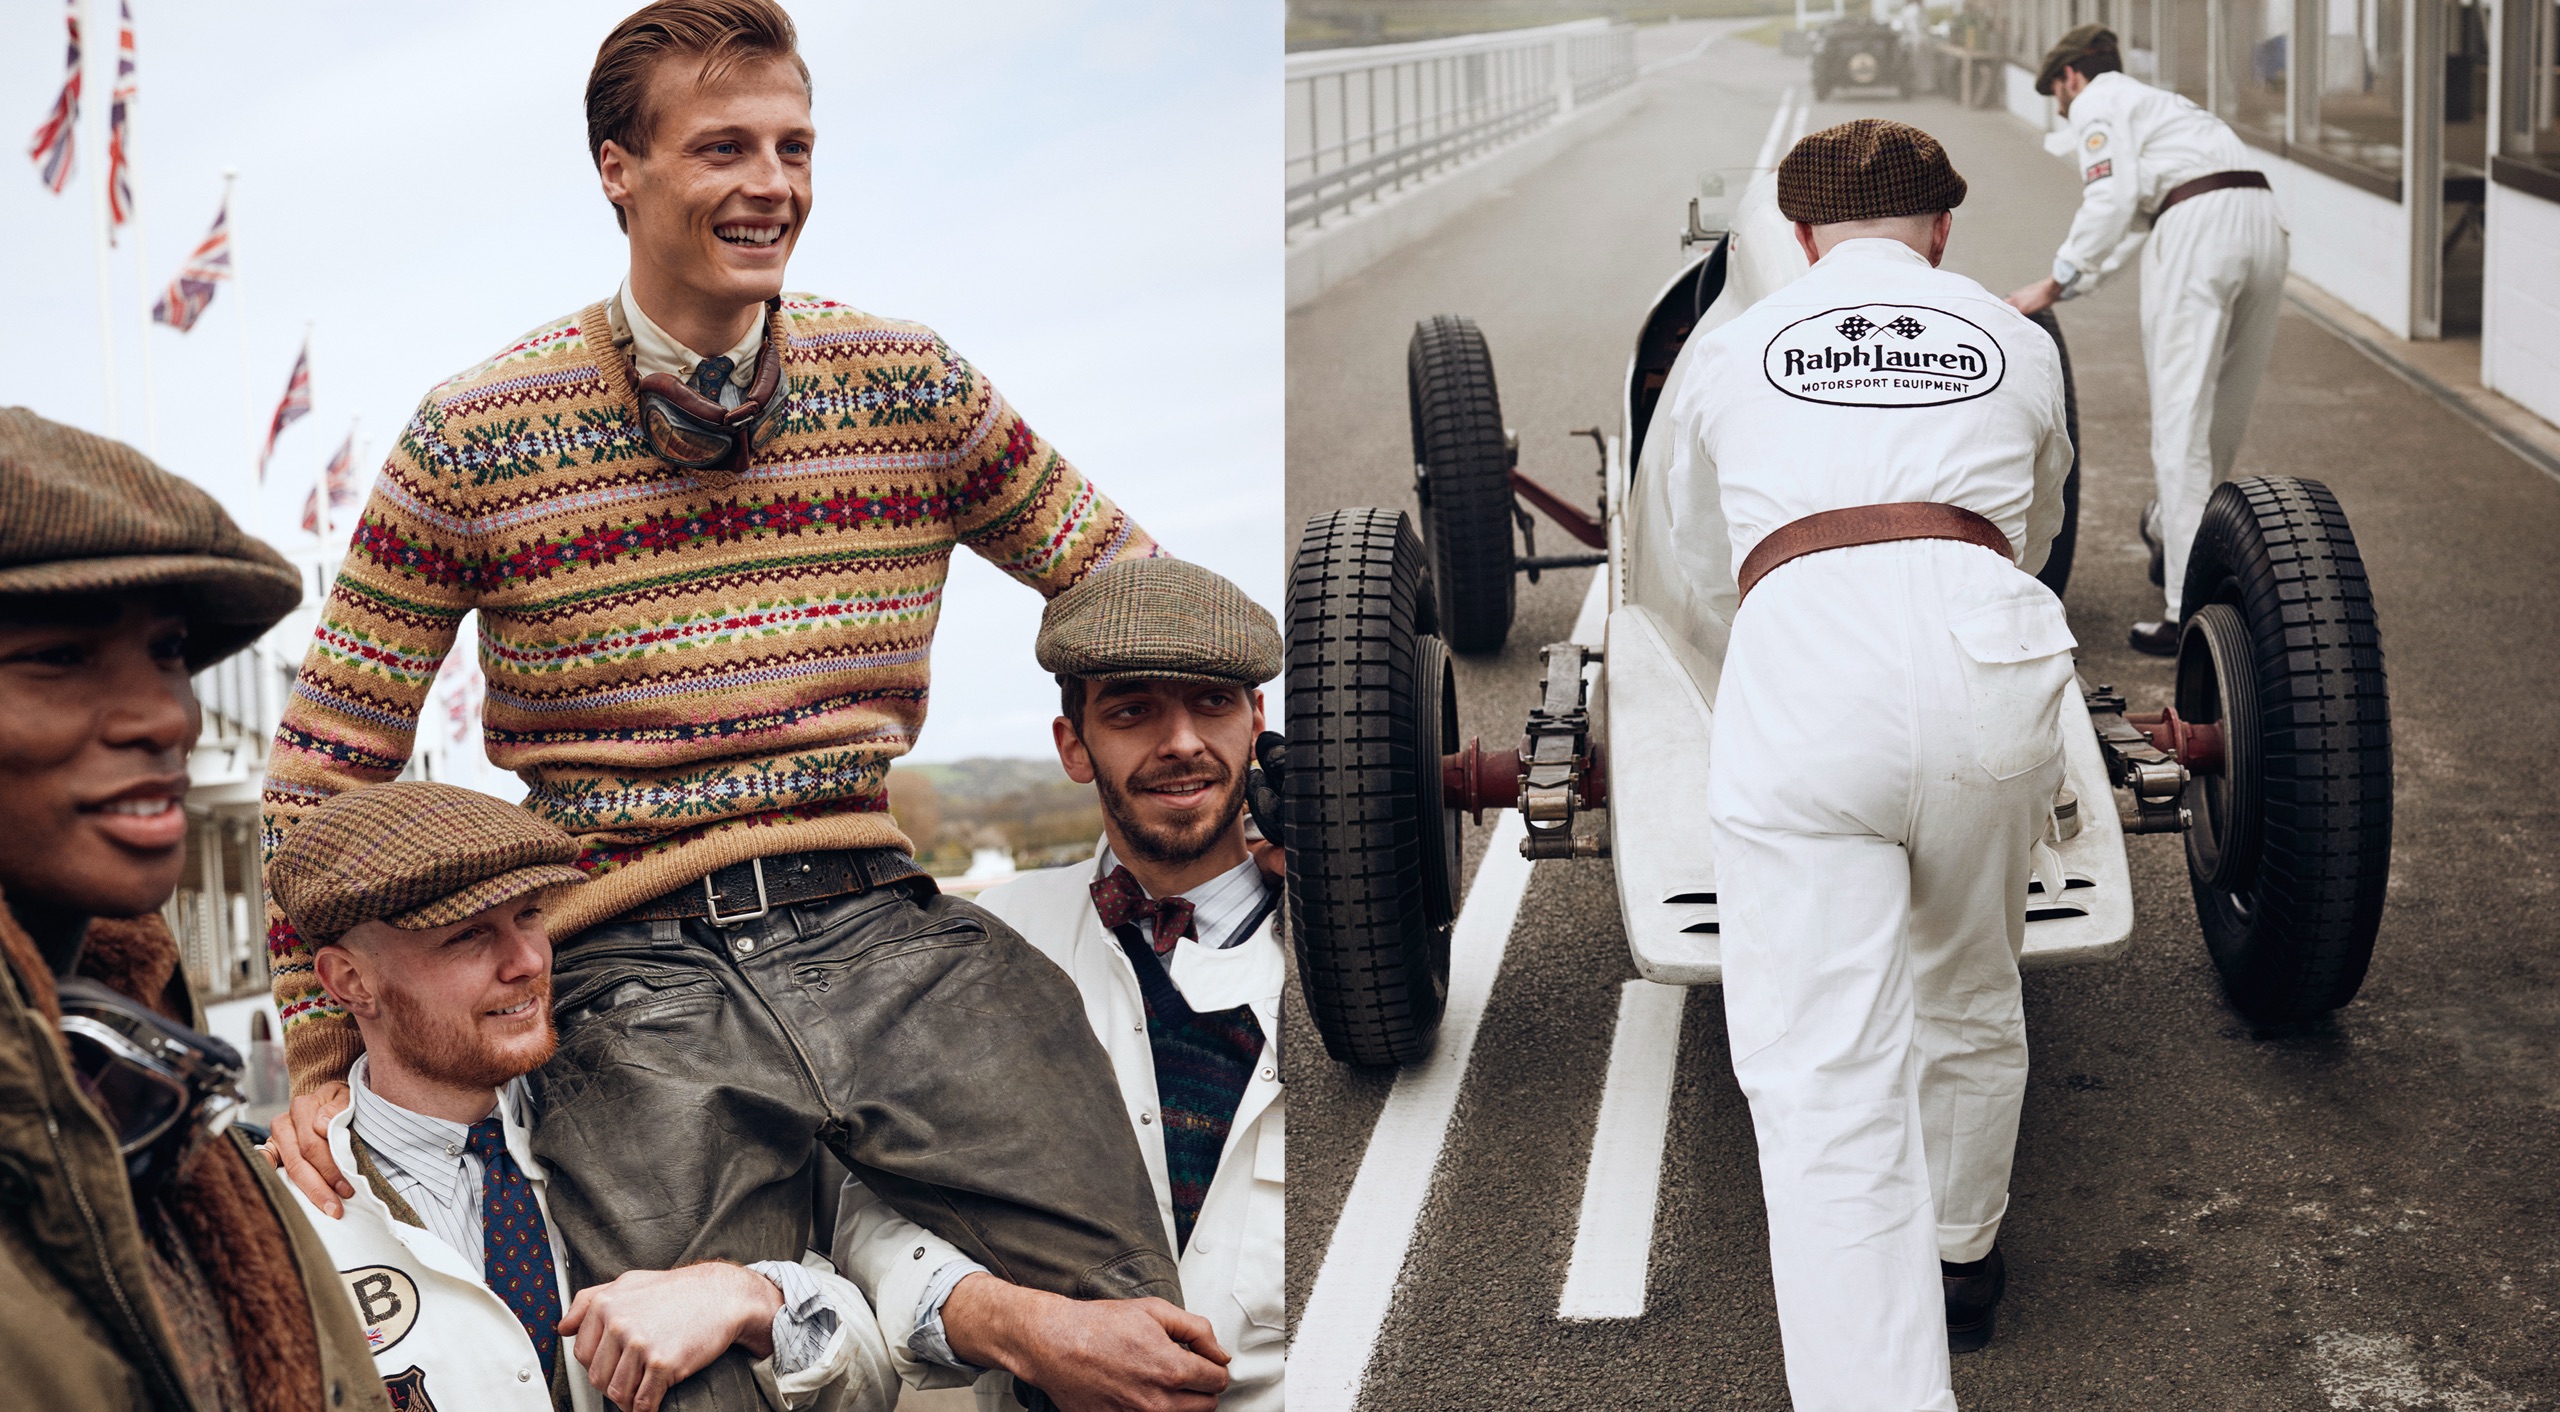 <strong>ON LOCATION</strong><br/><span>This season of Polo Originals, inspired by the golden era of Grand Prix car racing, was photographed at the Goodwood Motor Circuit, which is located in West Sussex, on the 12,000-acre Goodwood Estate. The Circuit has since become known for hosting a number of prestigious motorsport events, including the famous Festival of Speed and Revival.</span> <br/><rlmag_link href="https://www.ralphlauren.global/kg/en/search?cgid=brands-prl-tough-and-refined-cg"><button class="shop-collection">Shop the Story</button></rlmag_link>